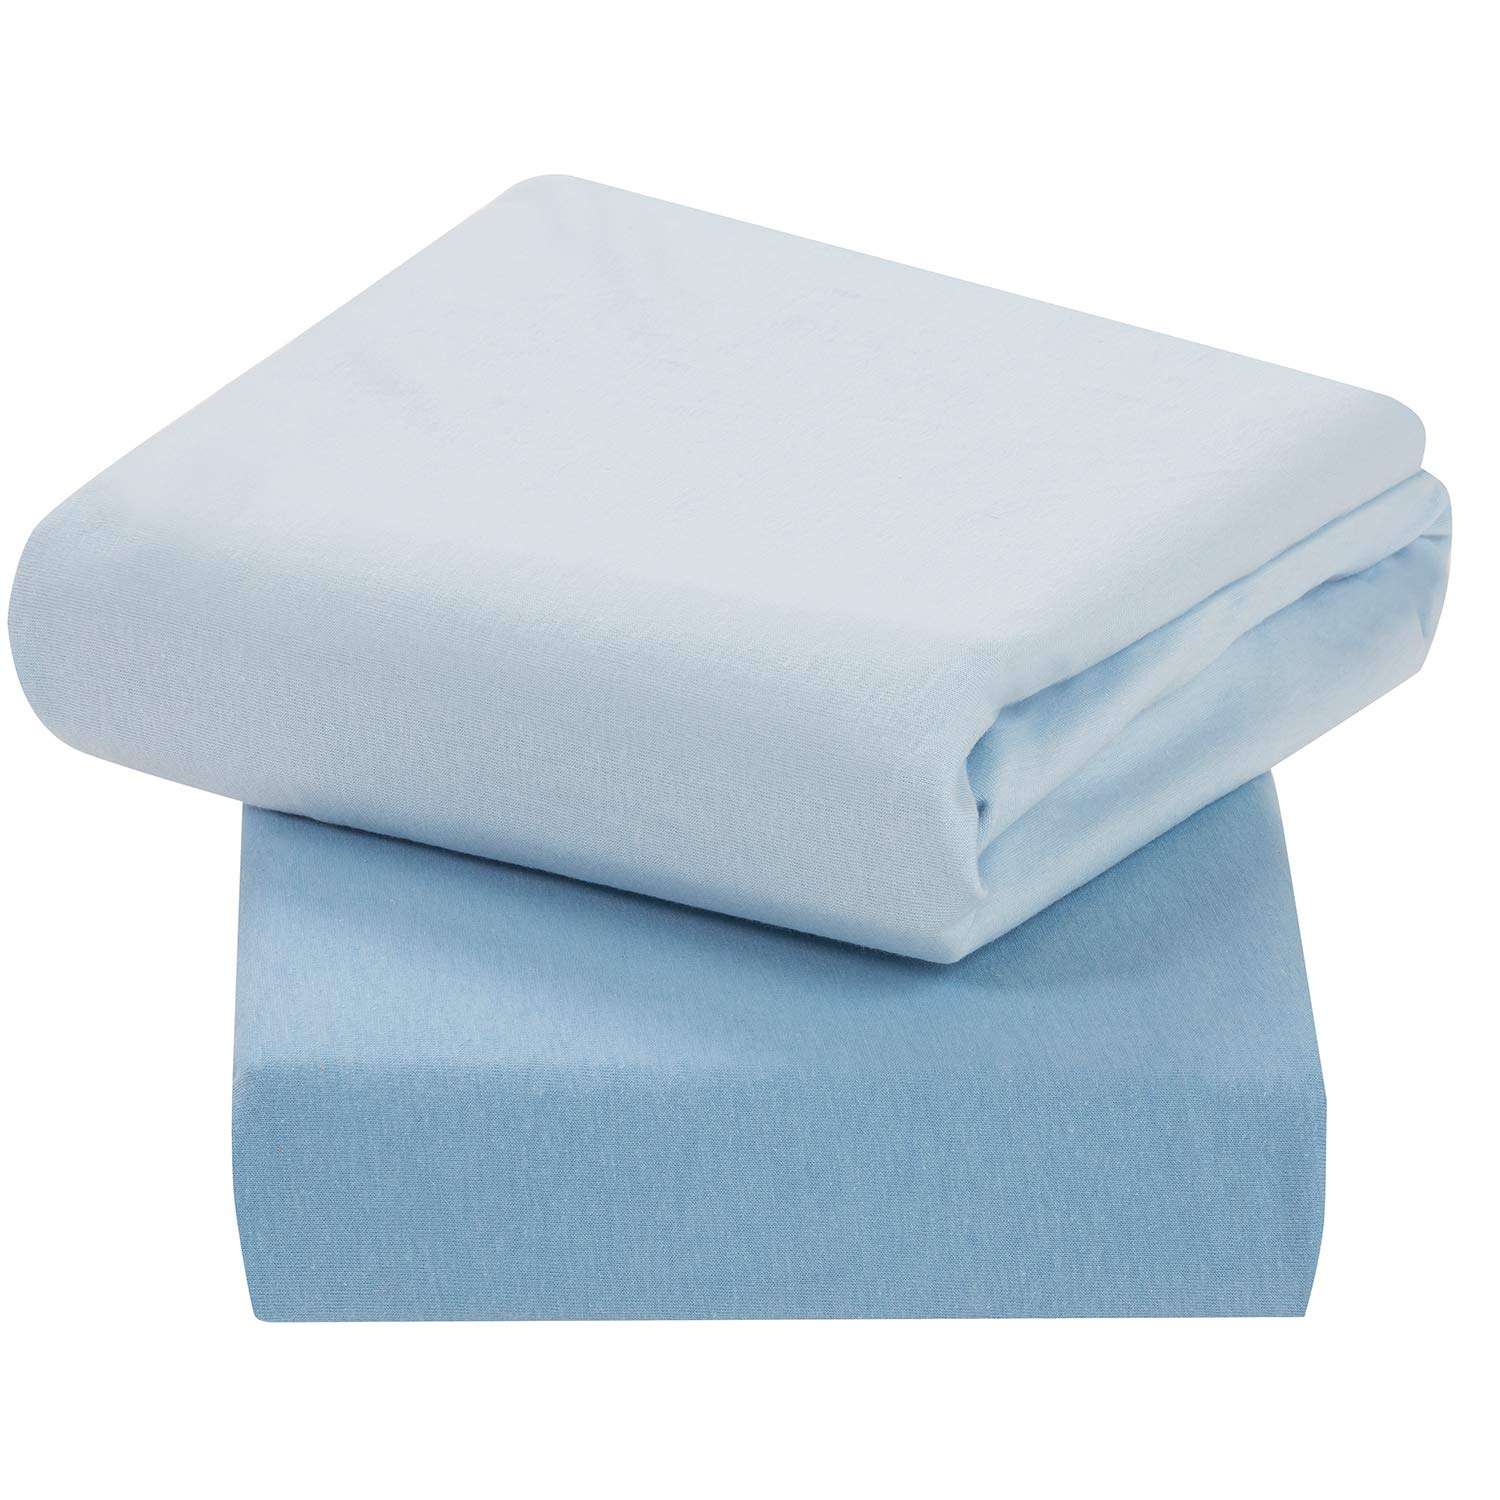 Clevamama 3326 Cot Fitted Sheet 70 x 140 cm, Pack of 2, Blue